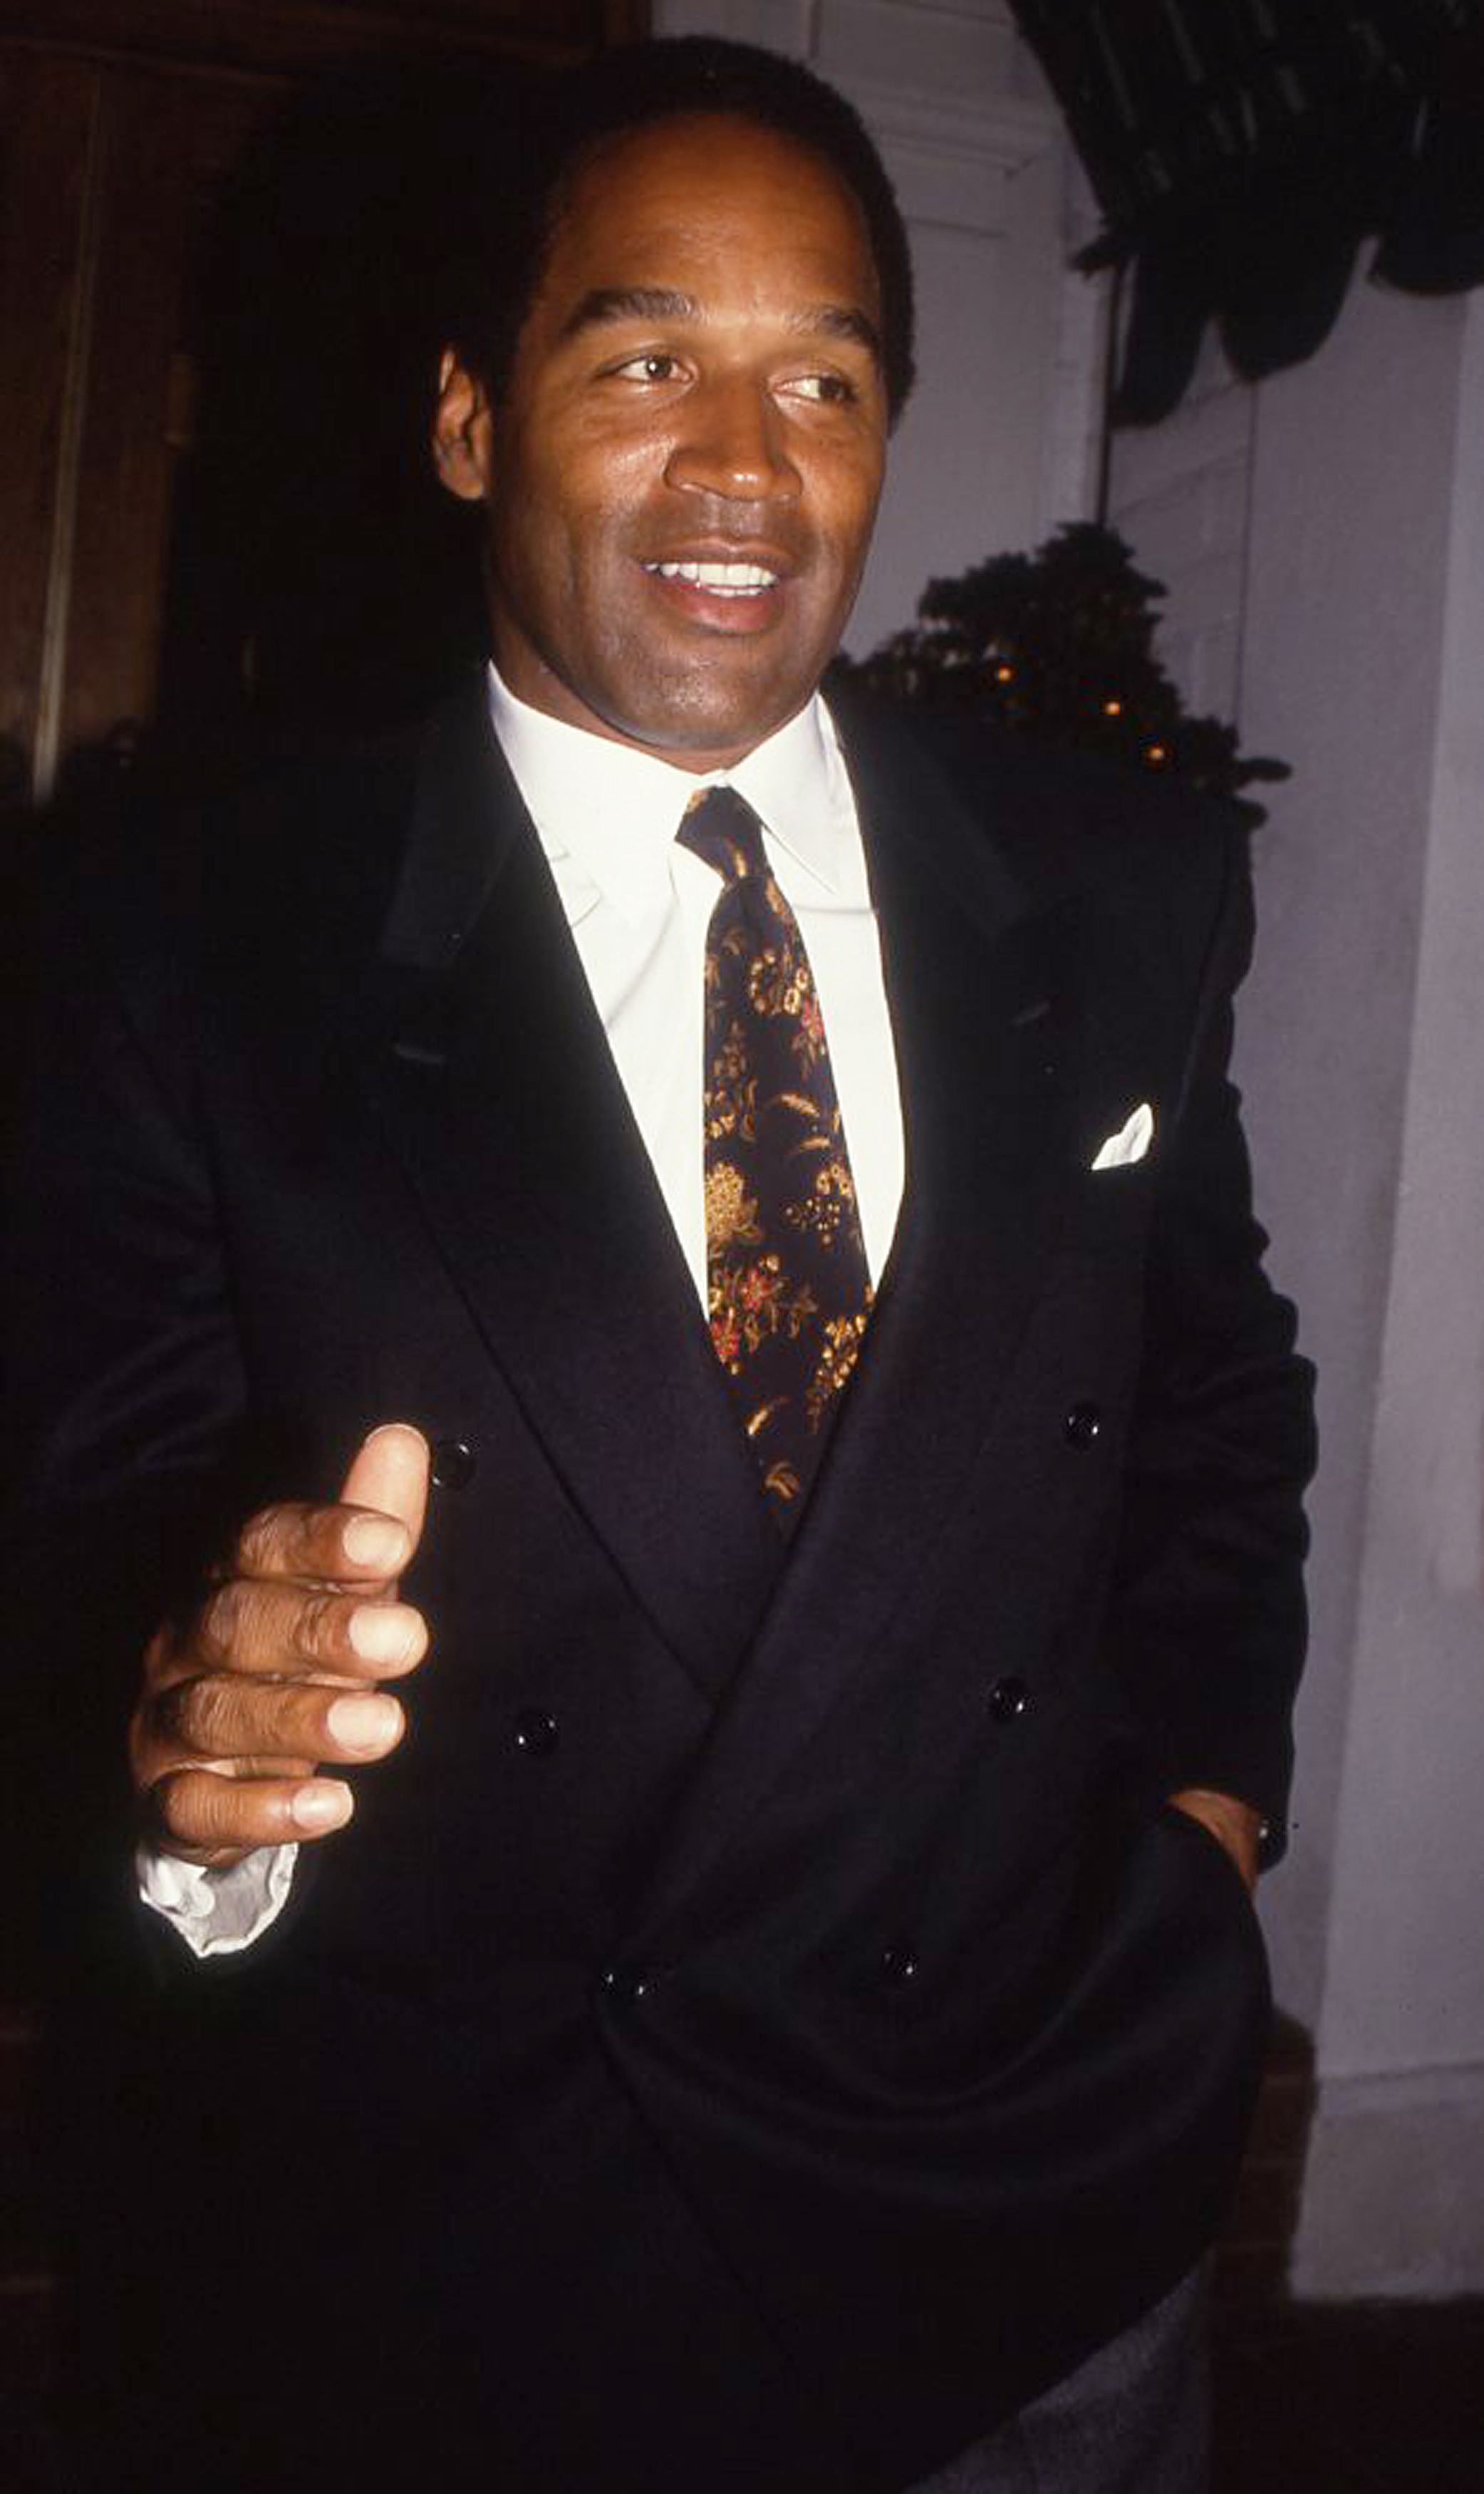 O.J. Simpson arriving at a celebrity event circa 1990.